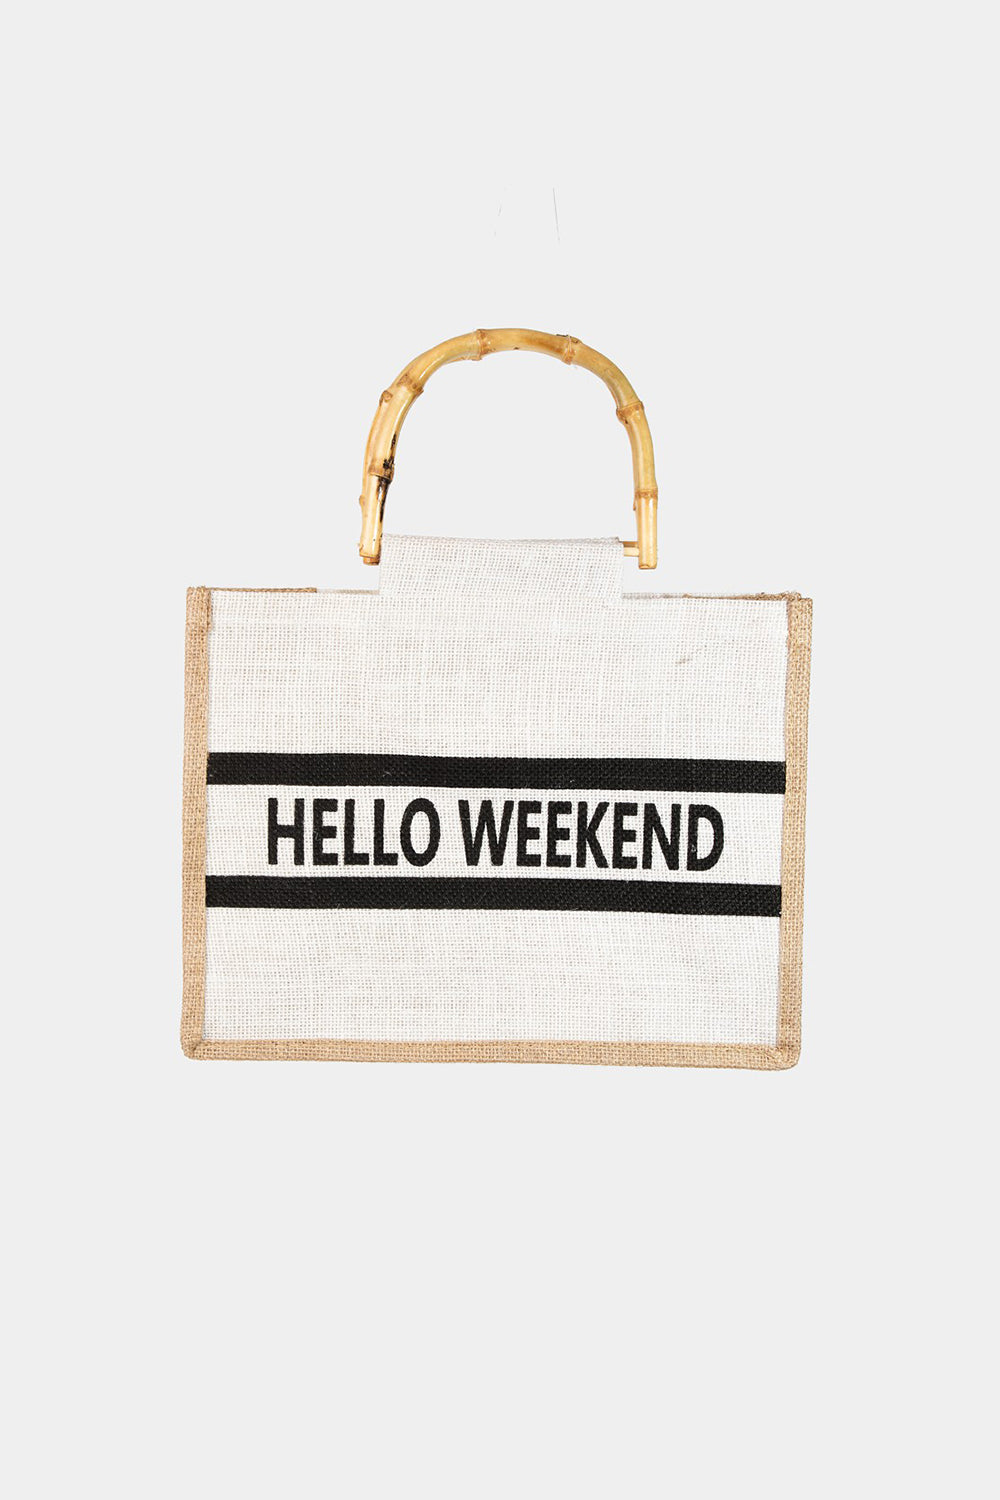 Lavender Fame Bamboo Handle Hello Weekend Tote Bag Sentient Beauty Fashions *Accessories